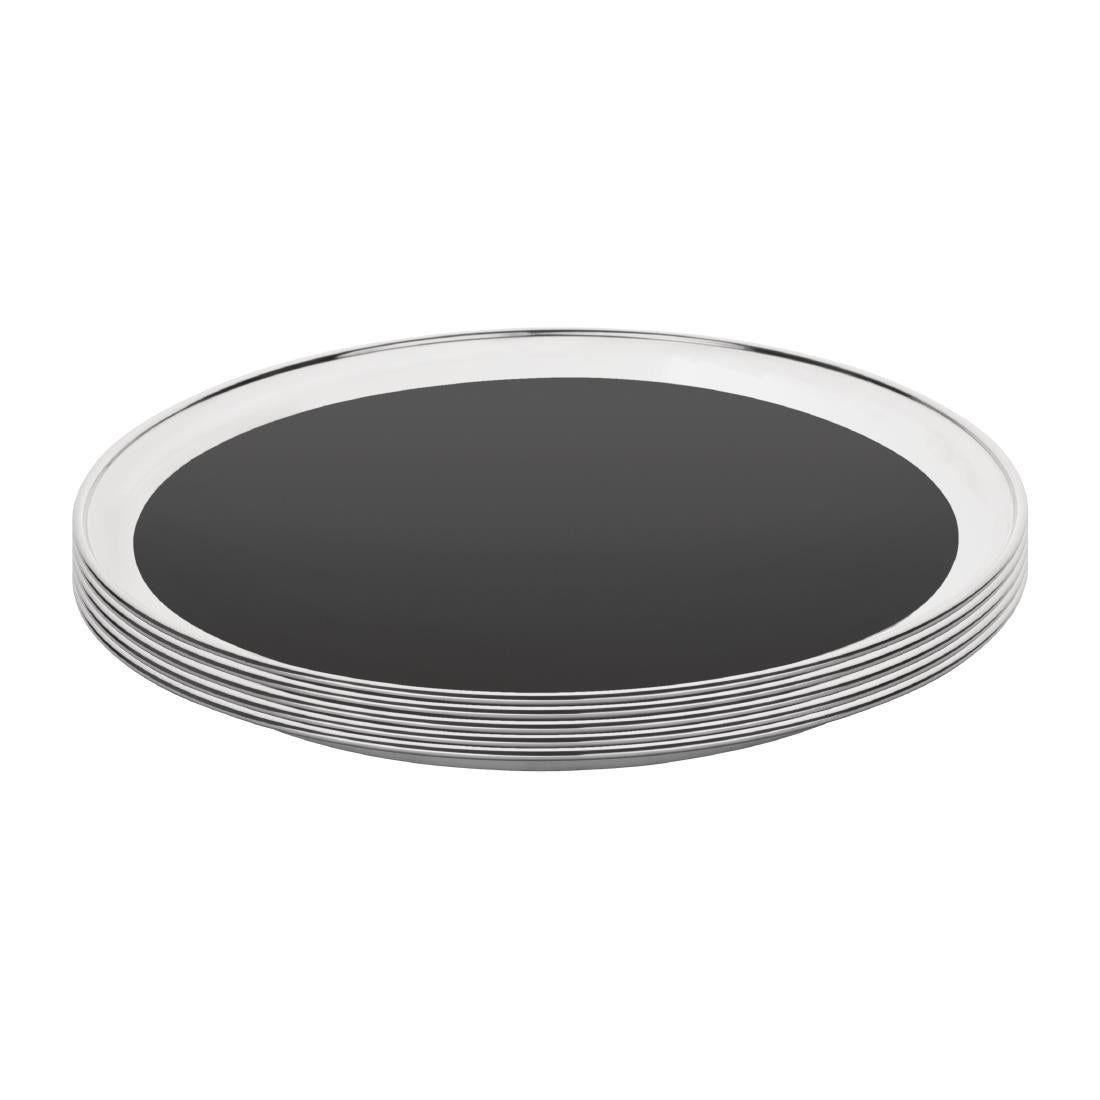 CM438 Olympia Stainless Steel Round Non-Slip Bar Tray 355mm